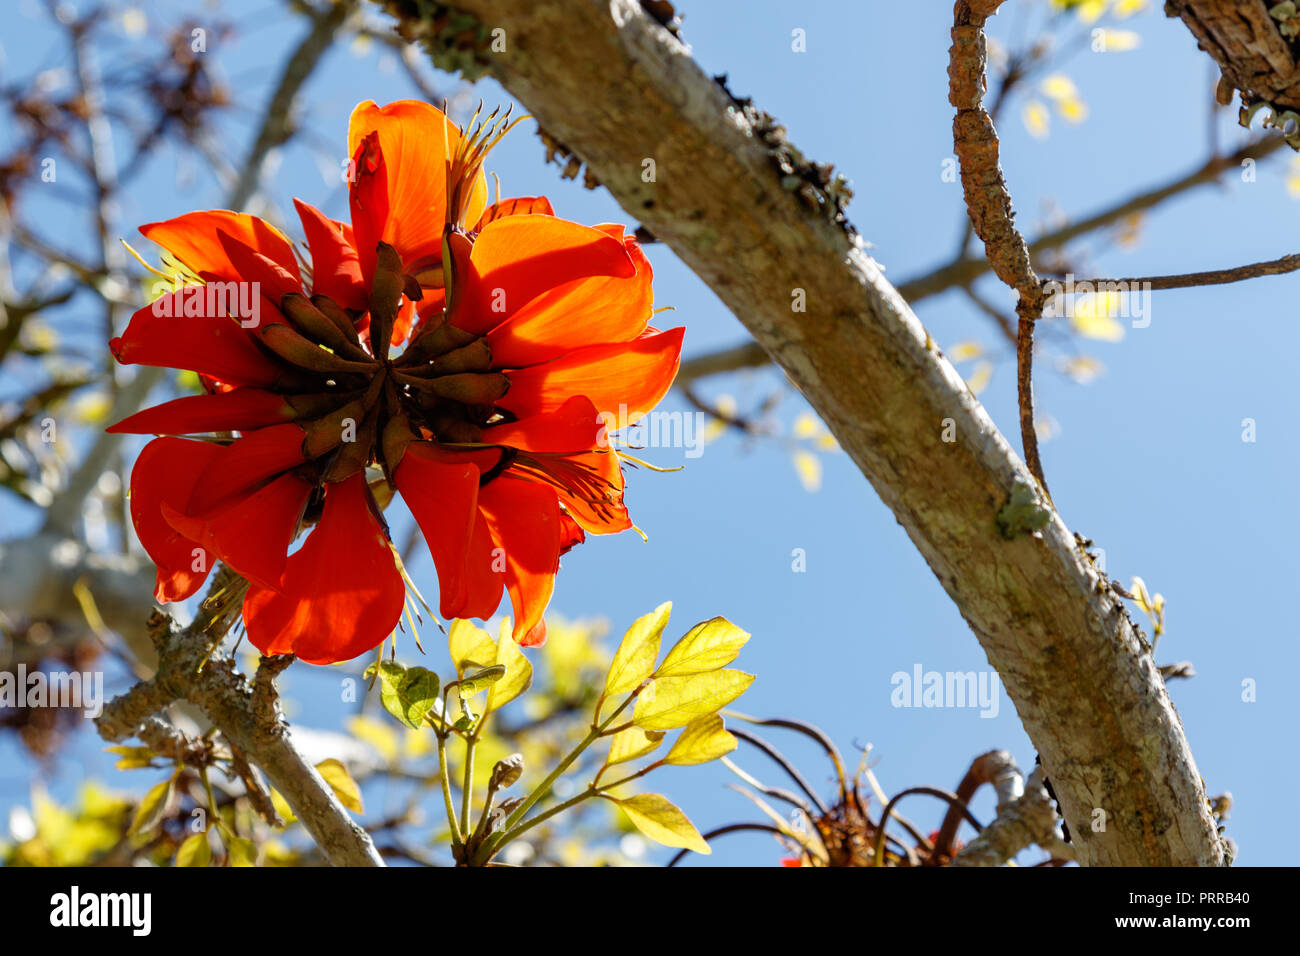 Bright Orange flower growing in the tree in the field Stock Photo